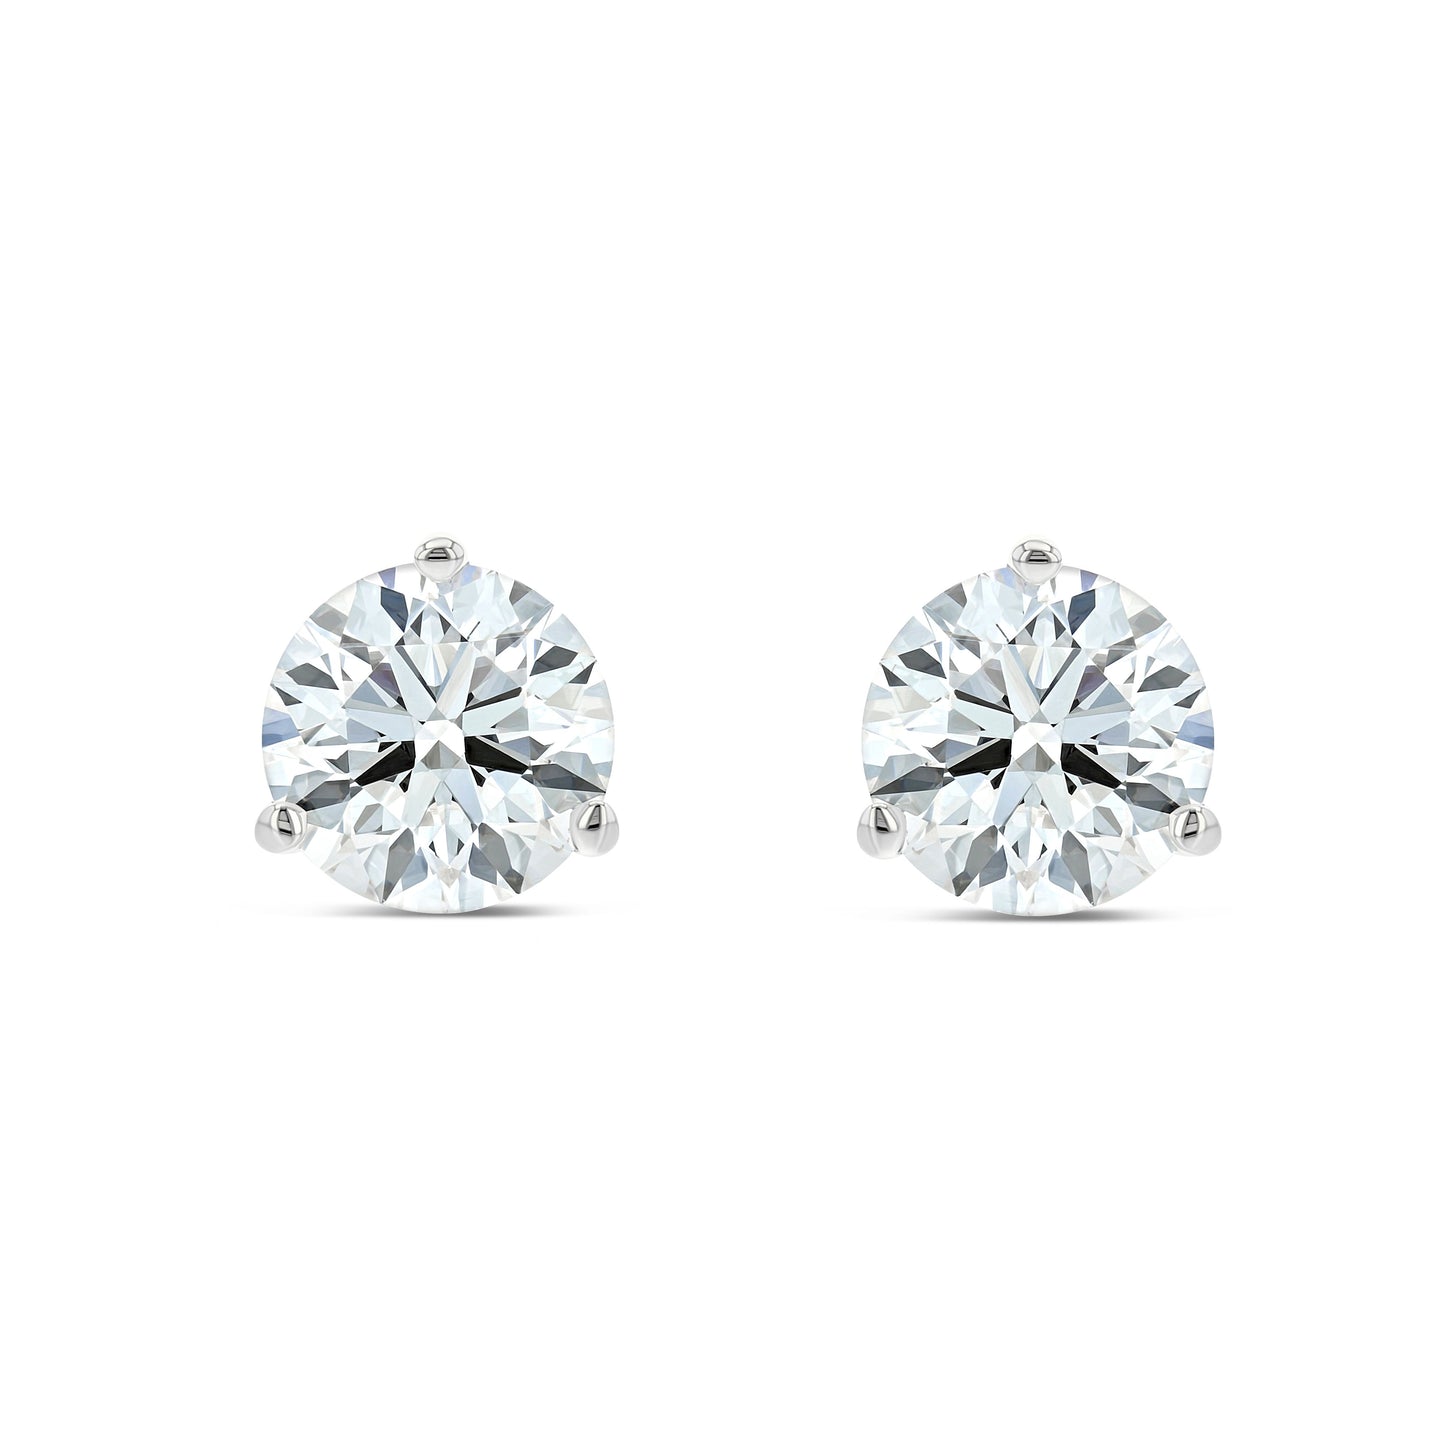 Platinum 3-prong Martini Round Diamond Stud Earrings 1ctw (5.0mm Ea), G Color, Si3 Clarity